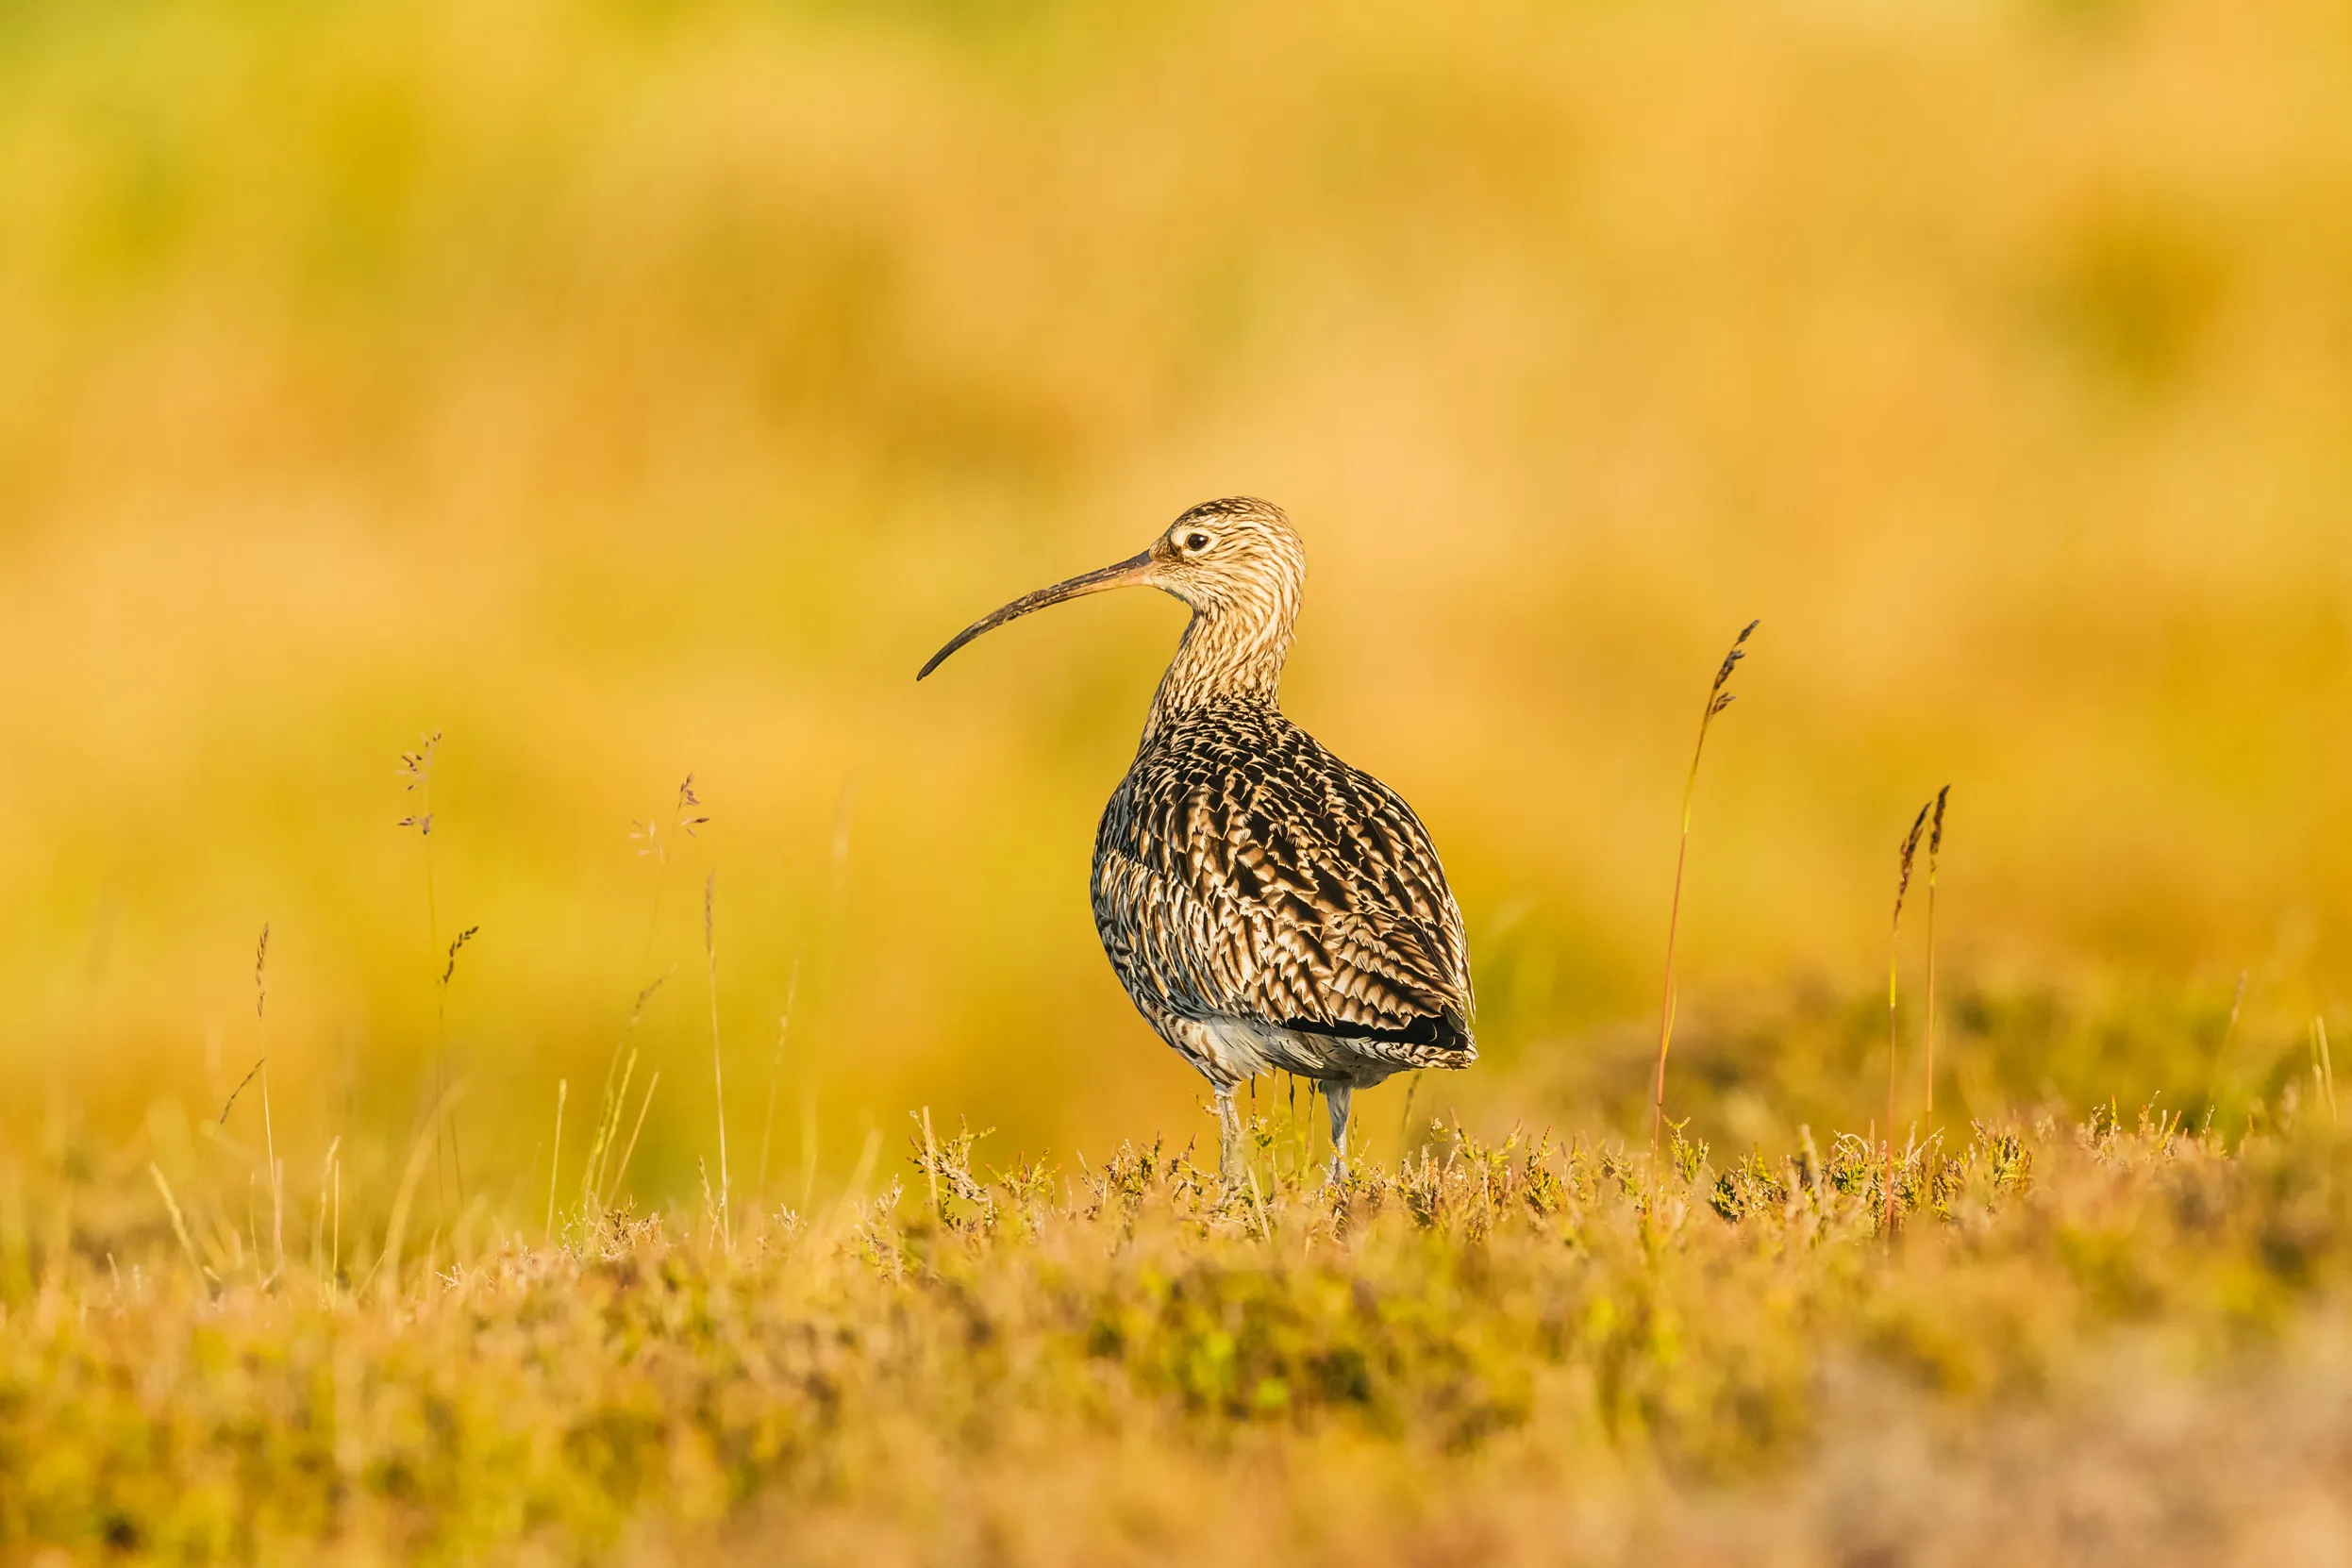 A curlew walking through a field of yellow grass.